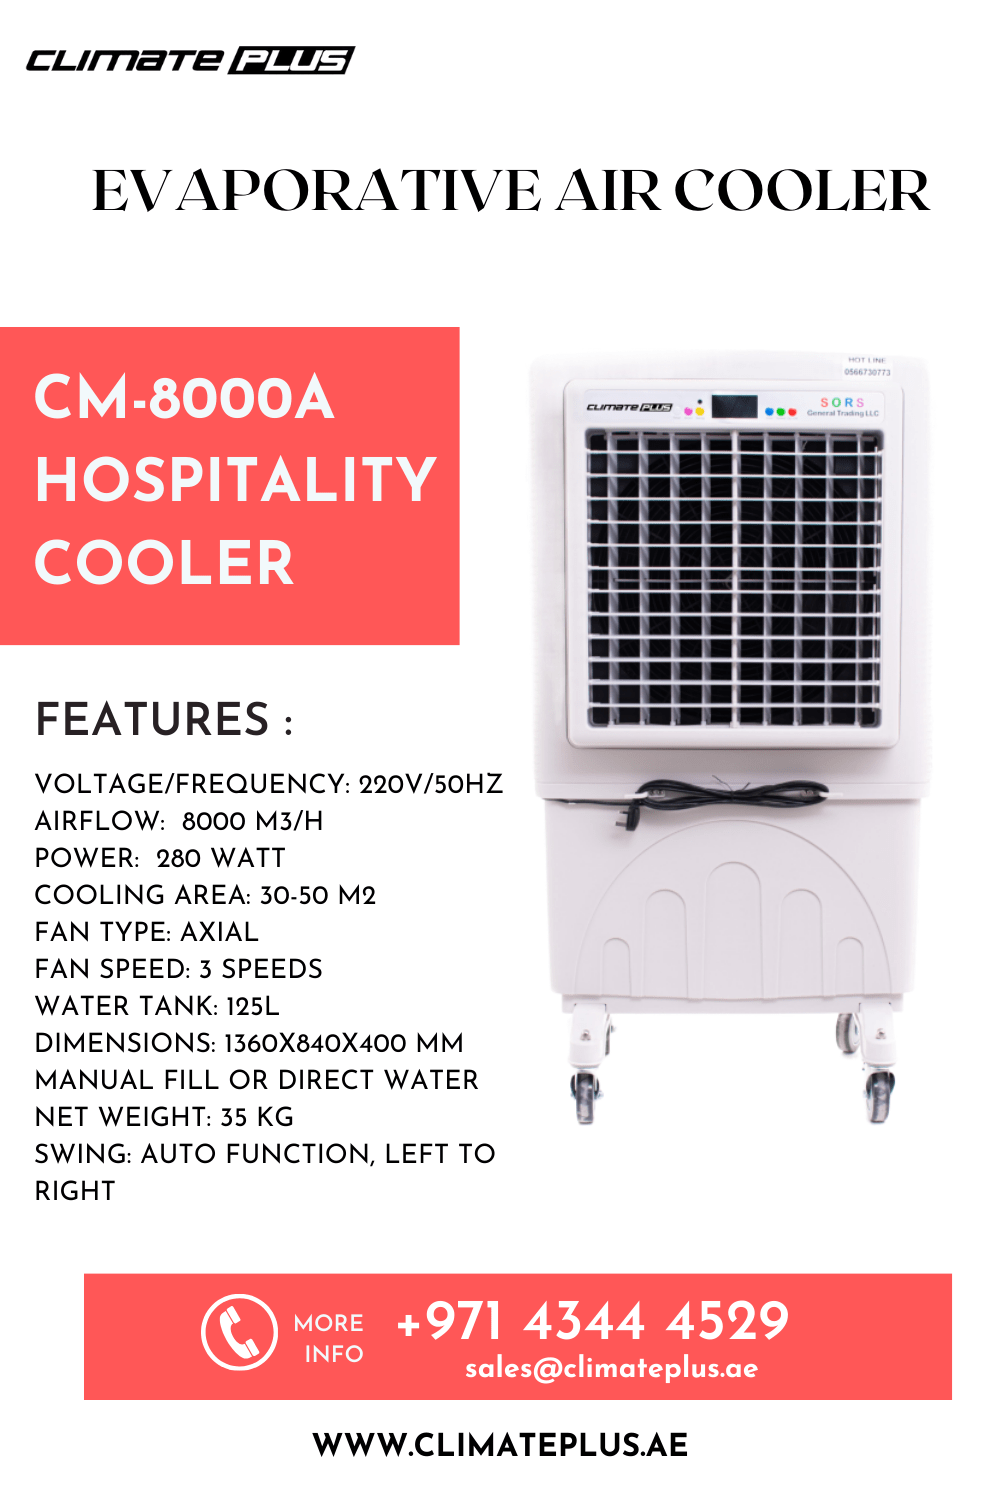 Stay Cool this Summer with Climate Plus Evaporative Air Coolers for commercial and industrial